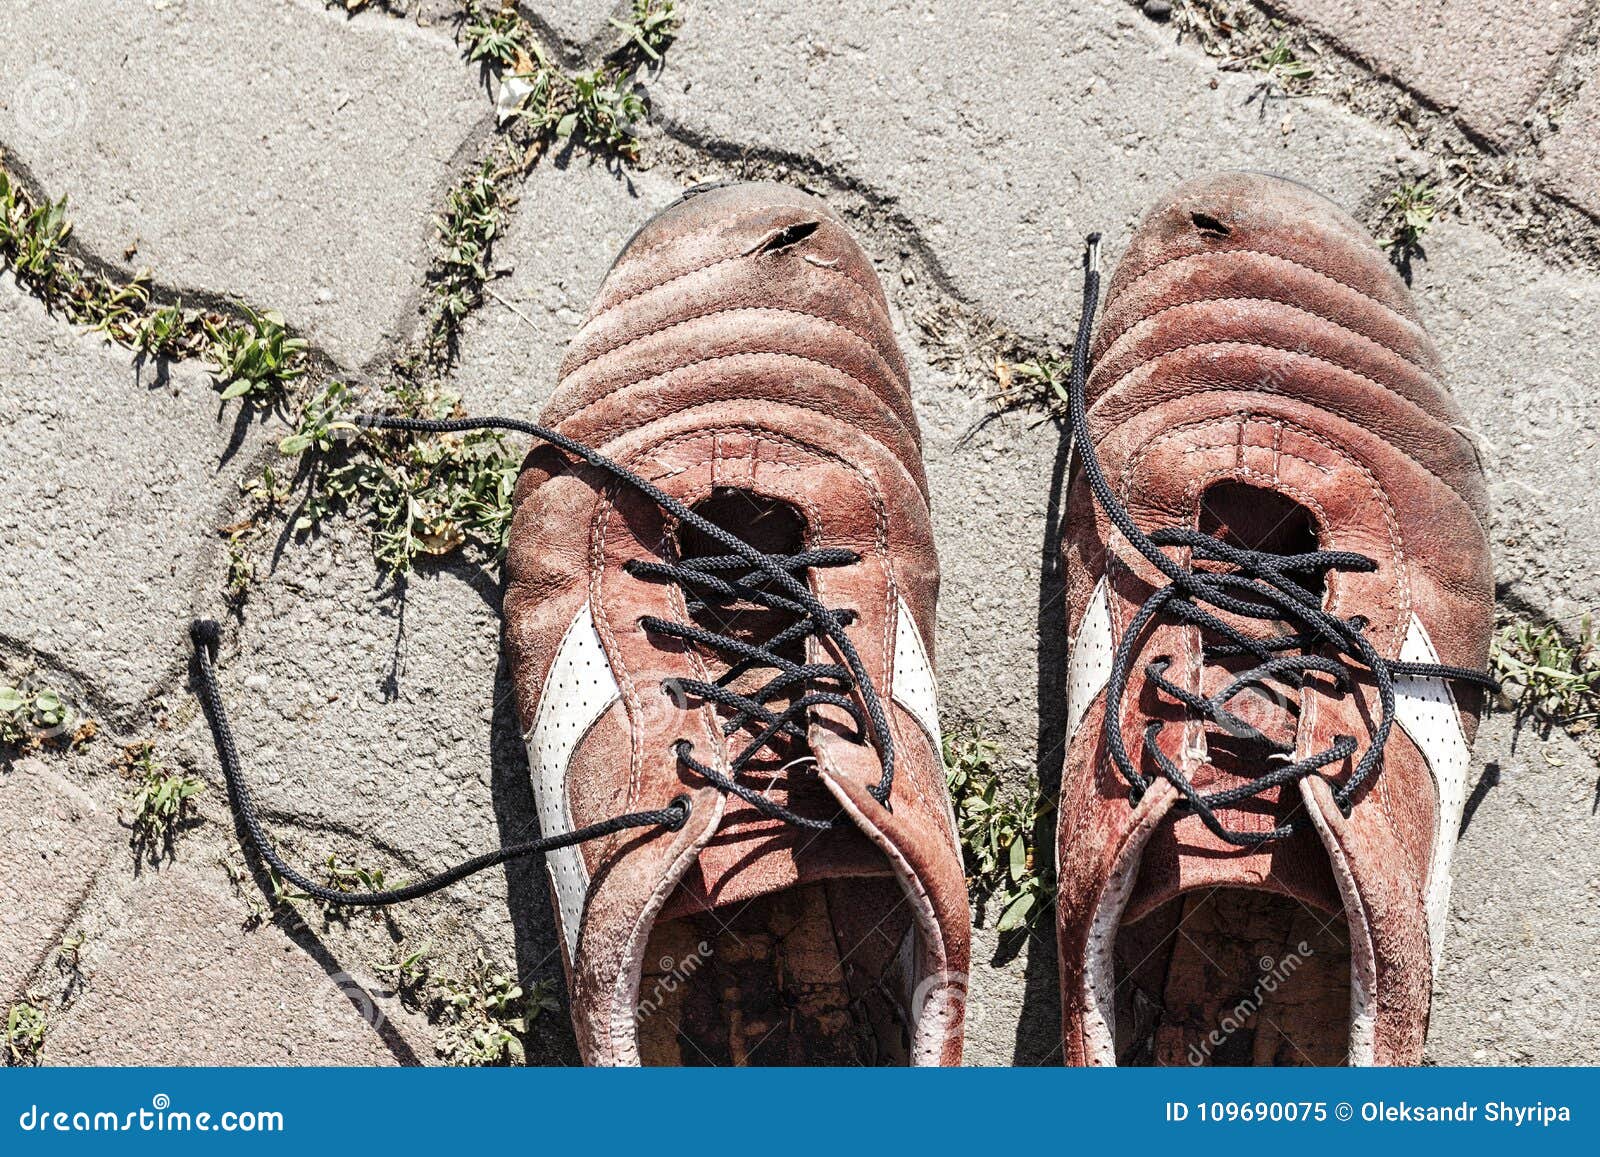 Old Men`s Sneakers Stand On A Stone Background Stock Image - Image of ...